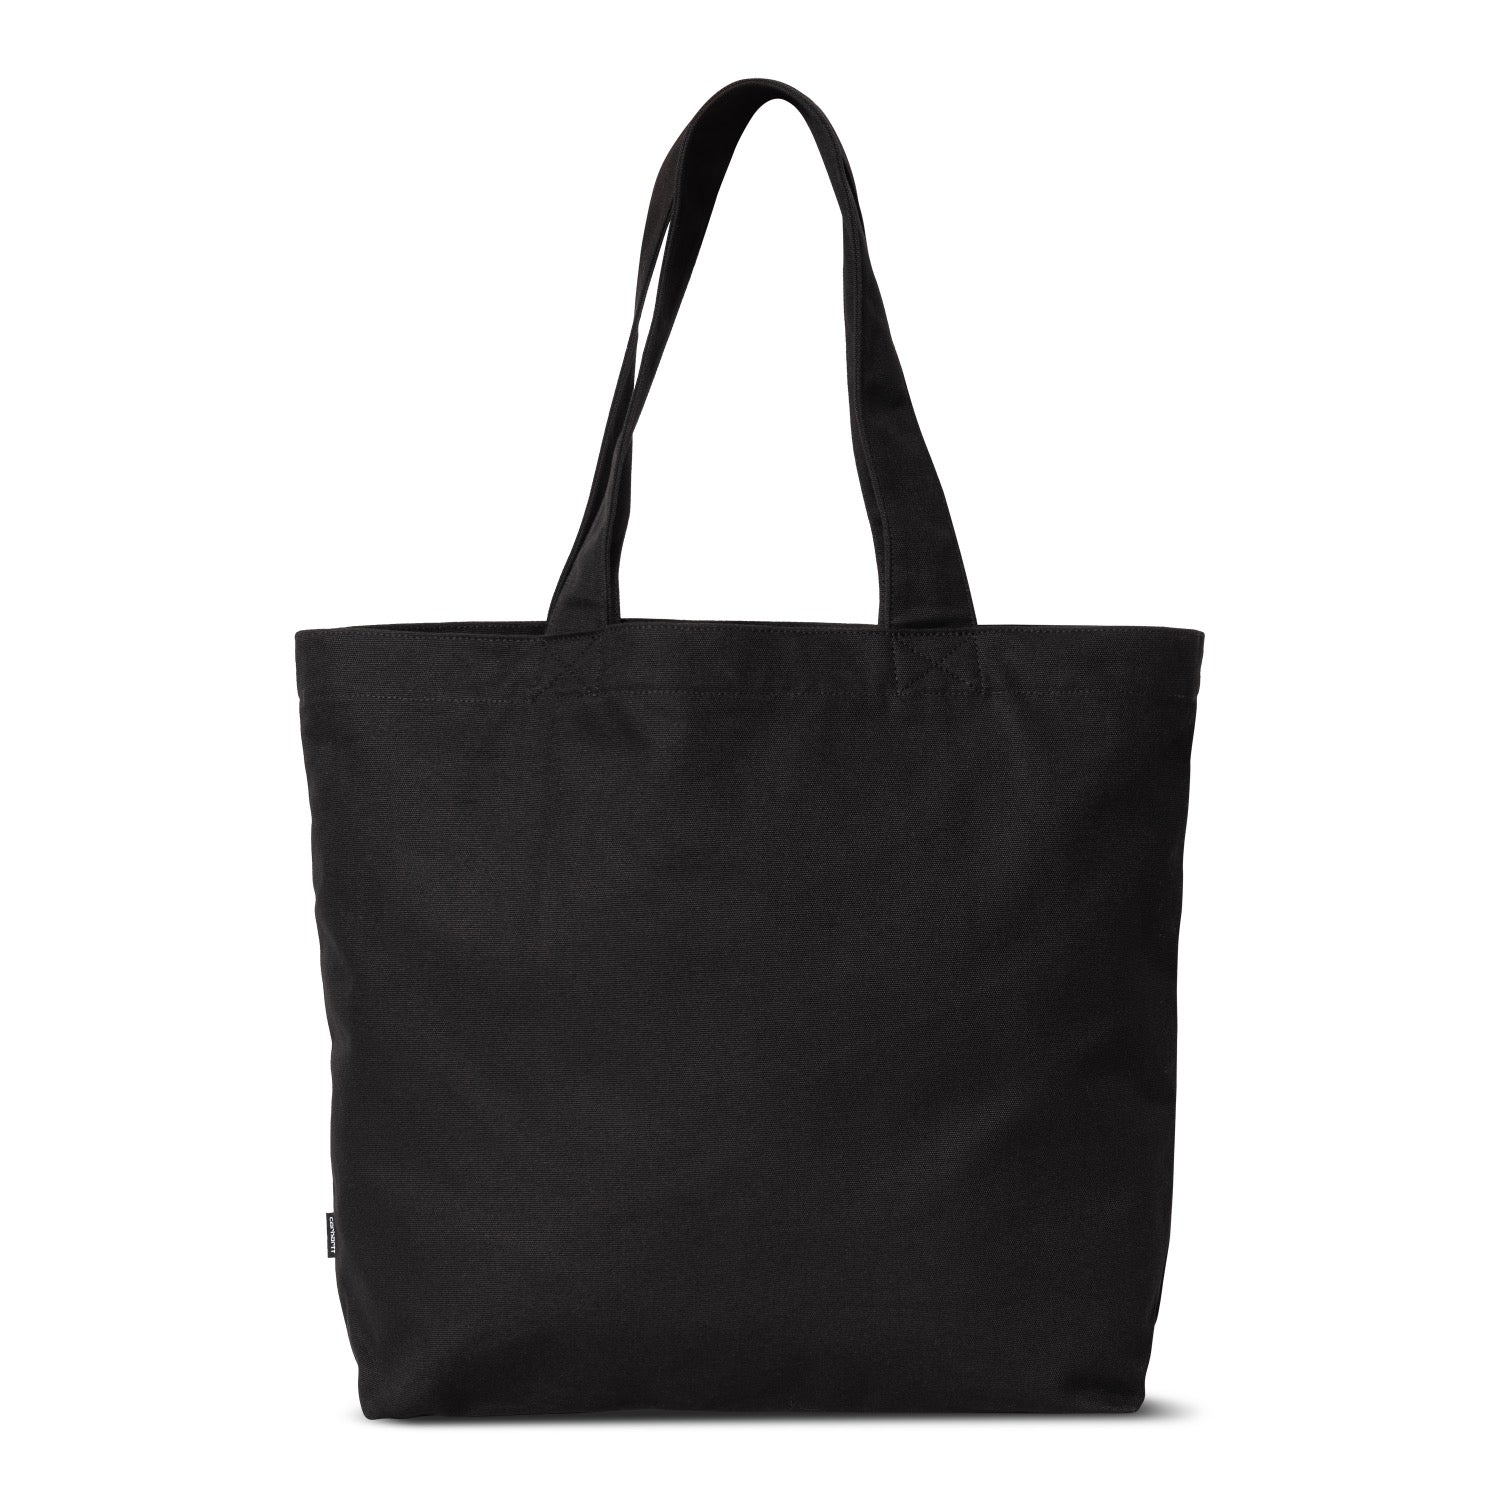 CANVAS GRAPHIC TOTE LARGE - Onyx Print, Black